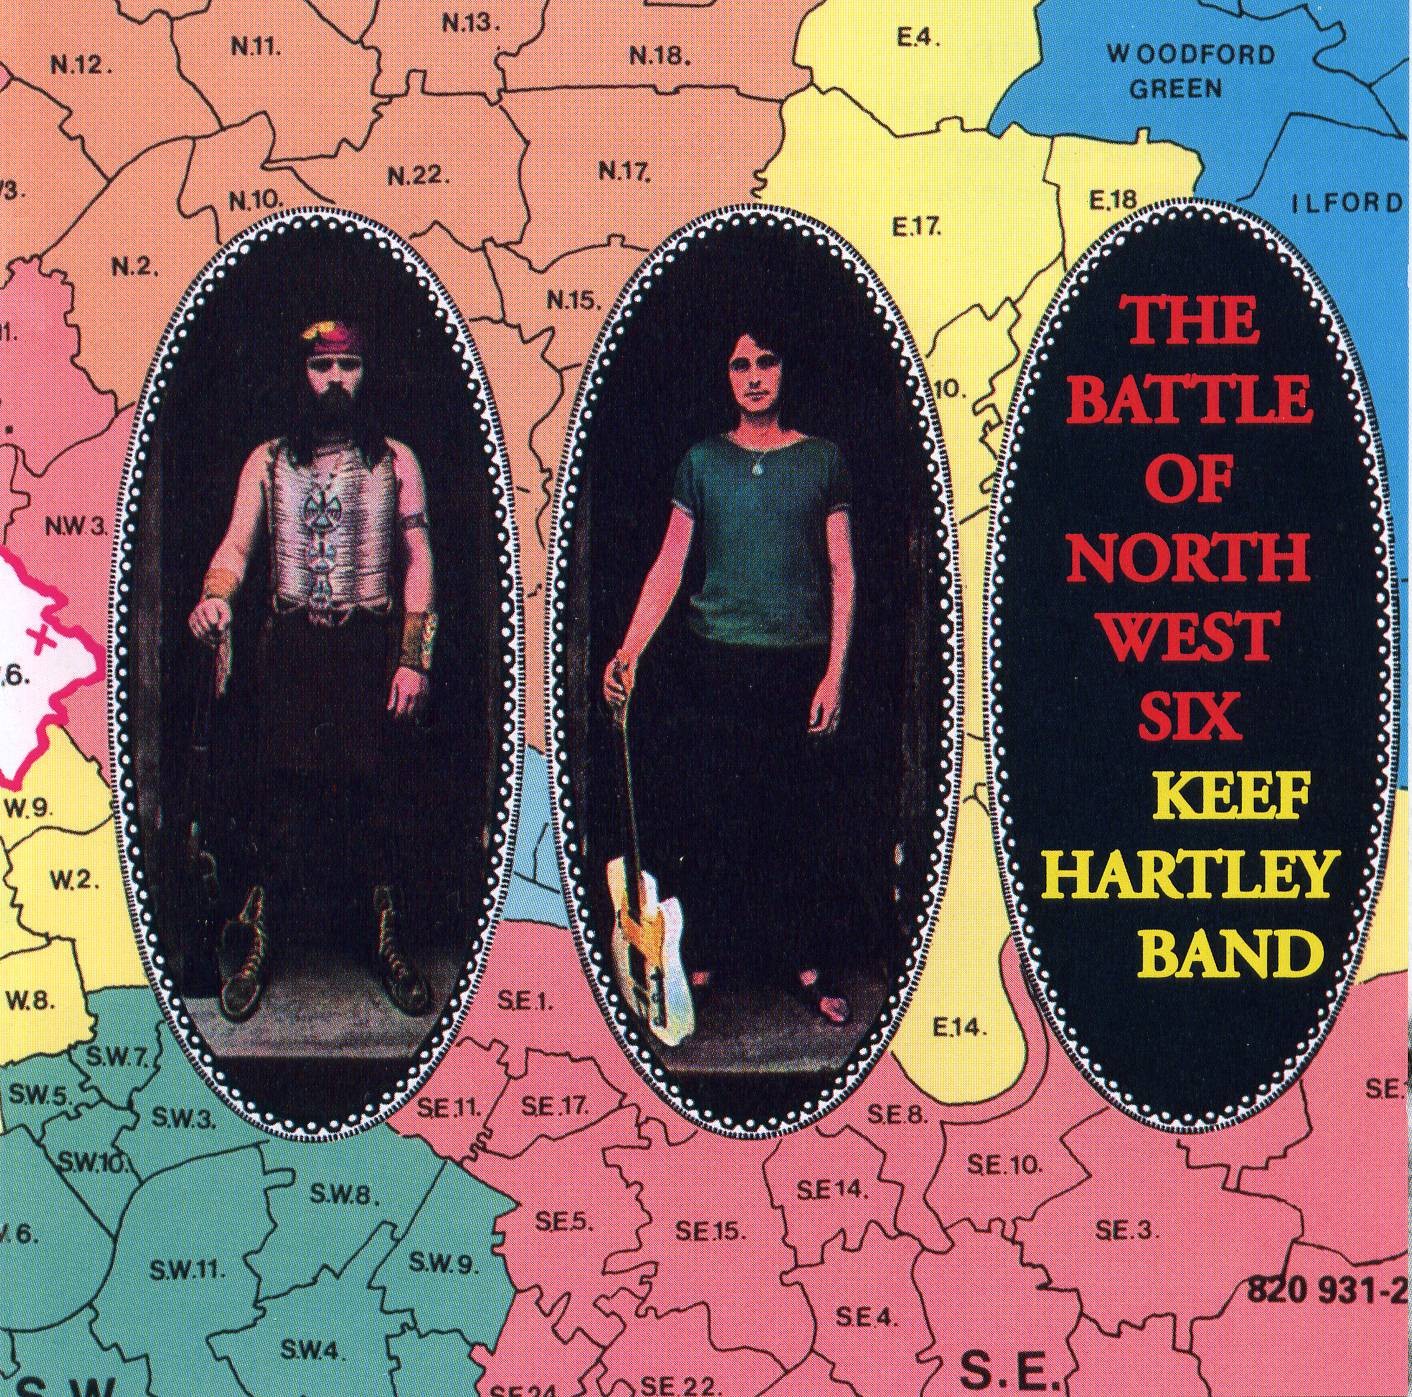 keef_hartley_band_the_battle_of_north_west_six